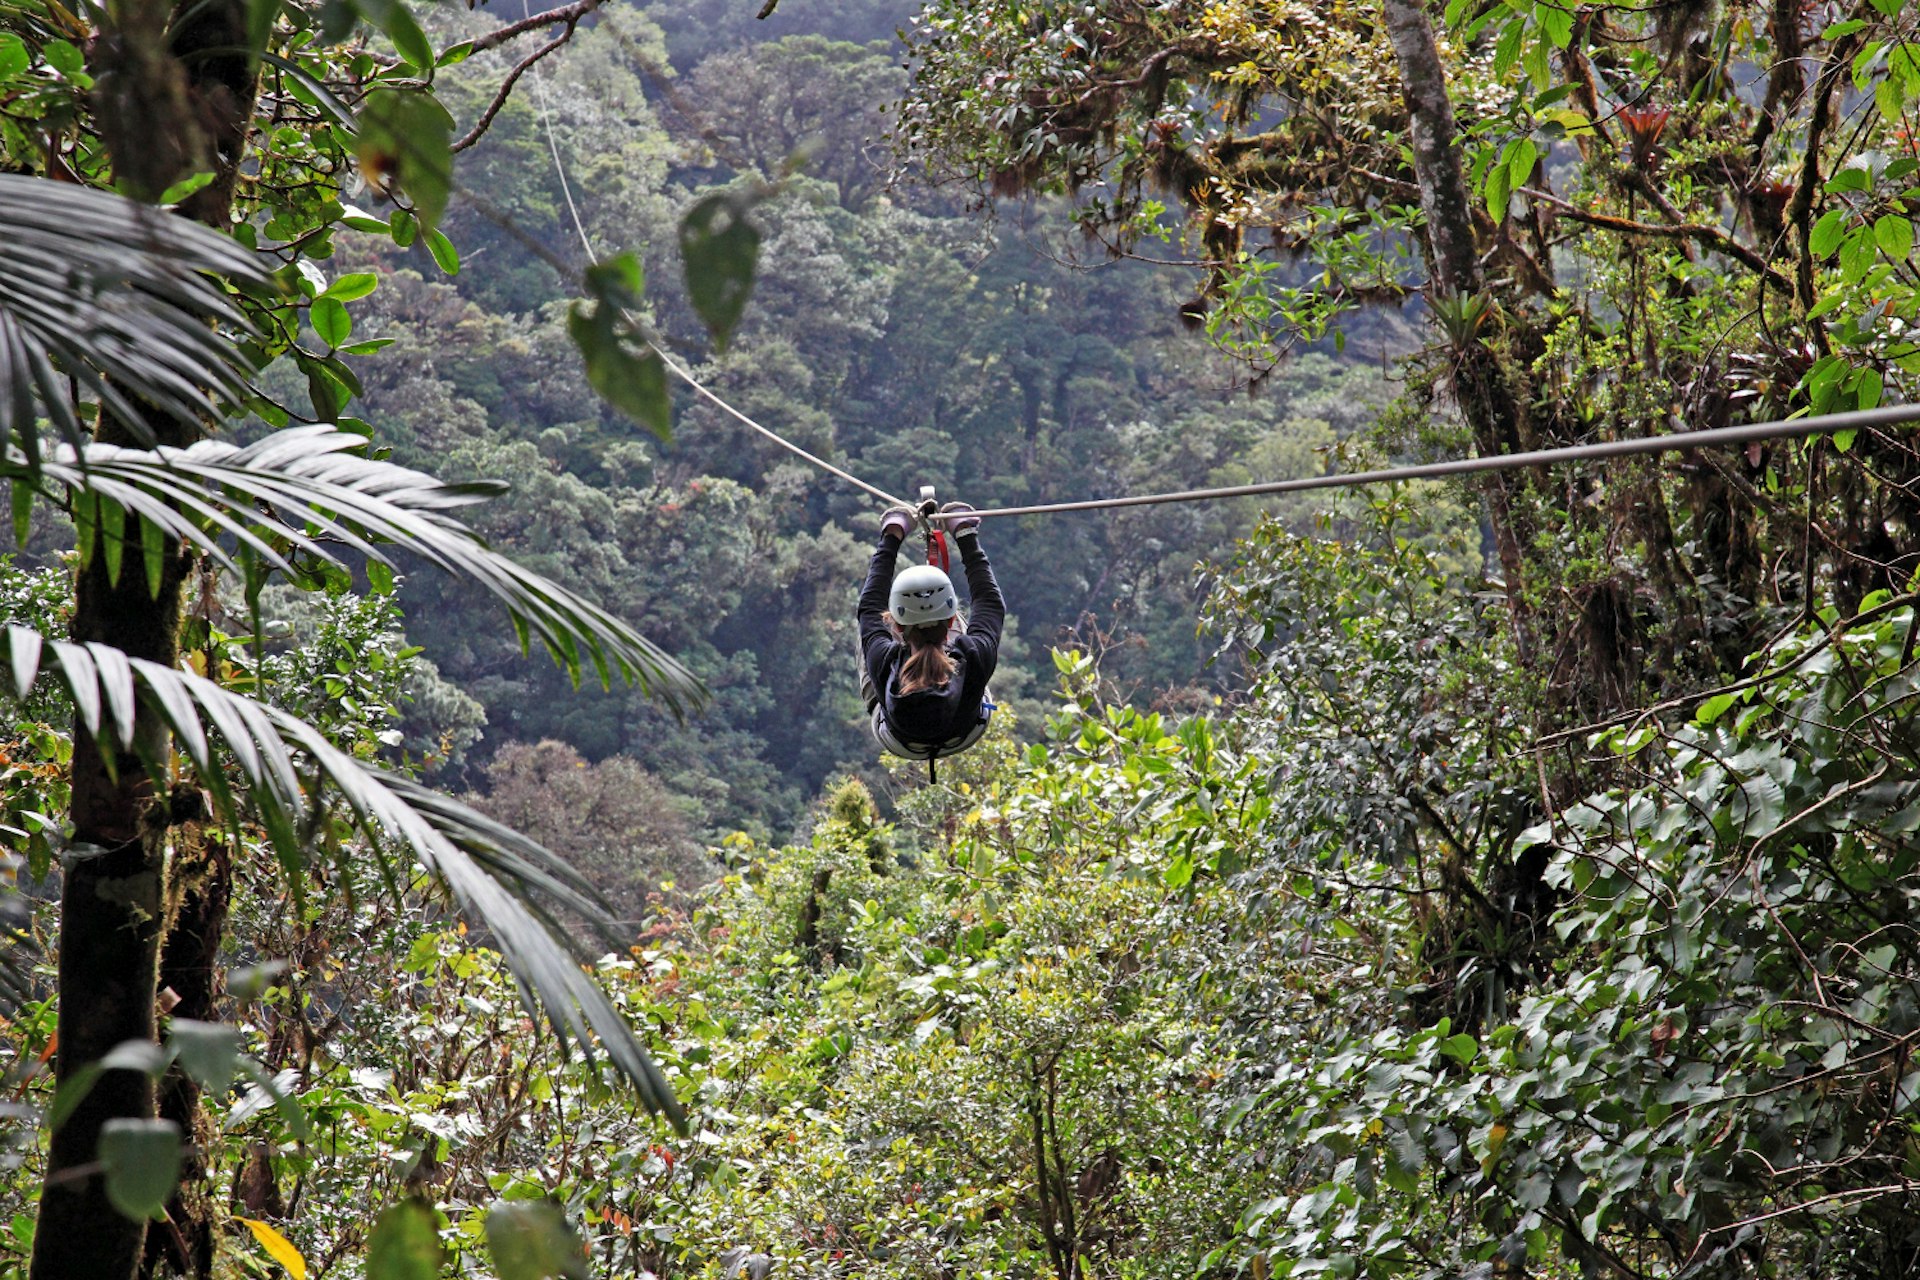 Woman solo rider on 'zipline' cable above forest canopy in Monteverde region.